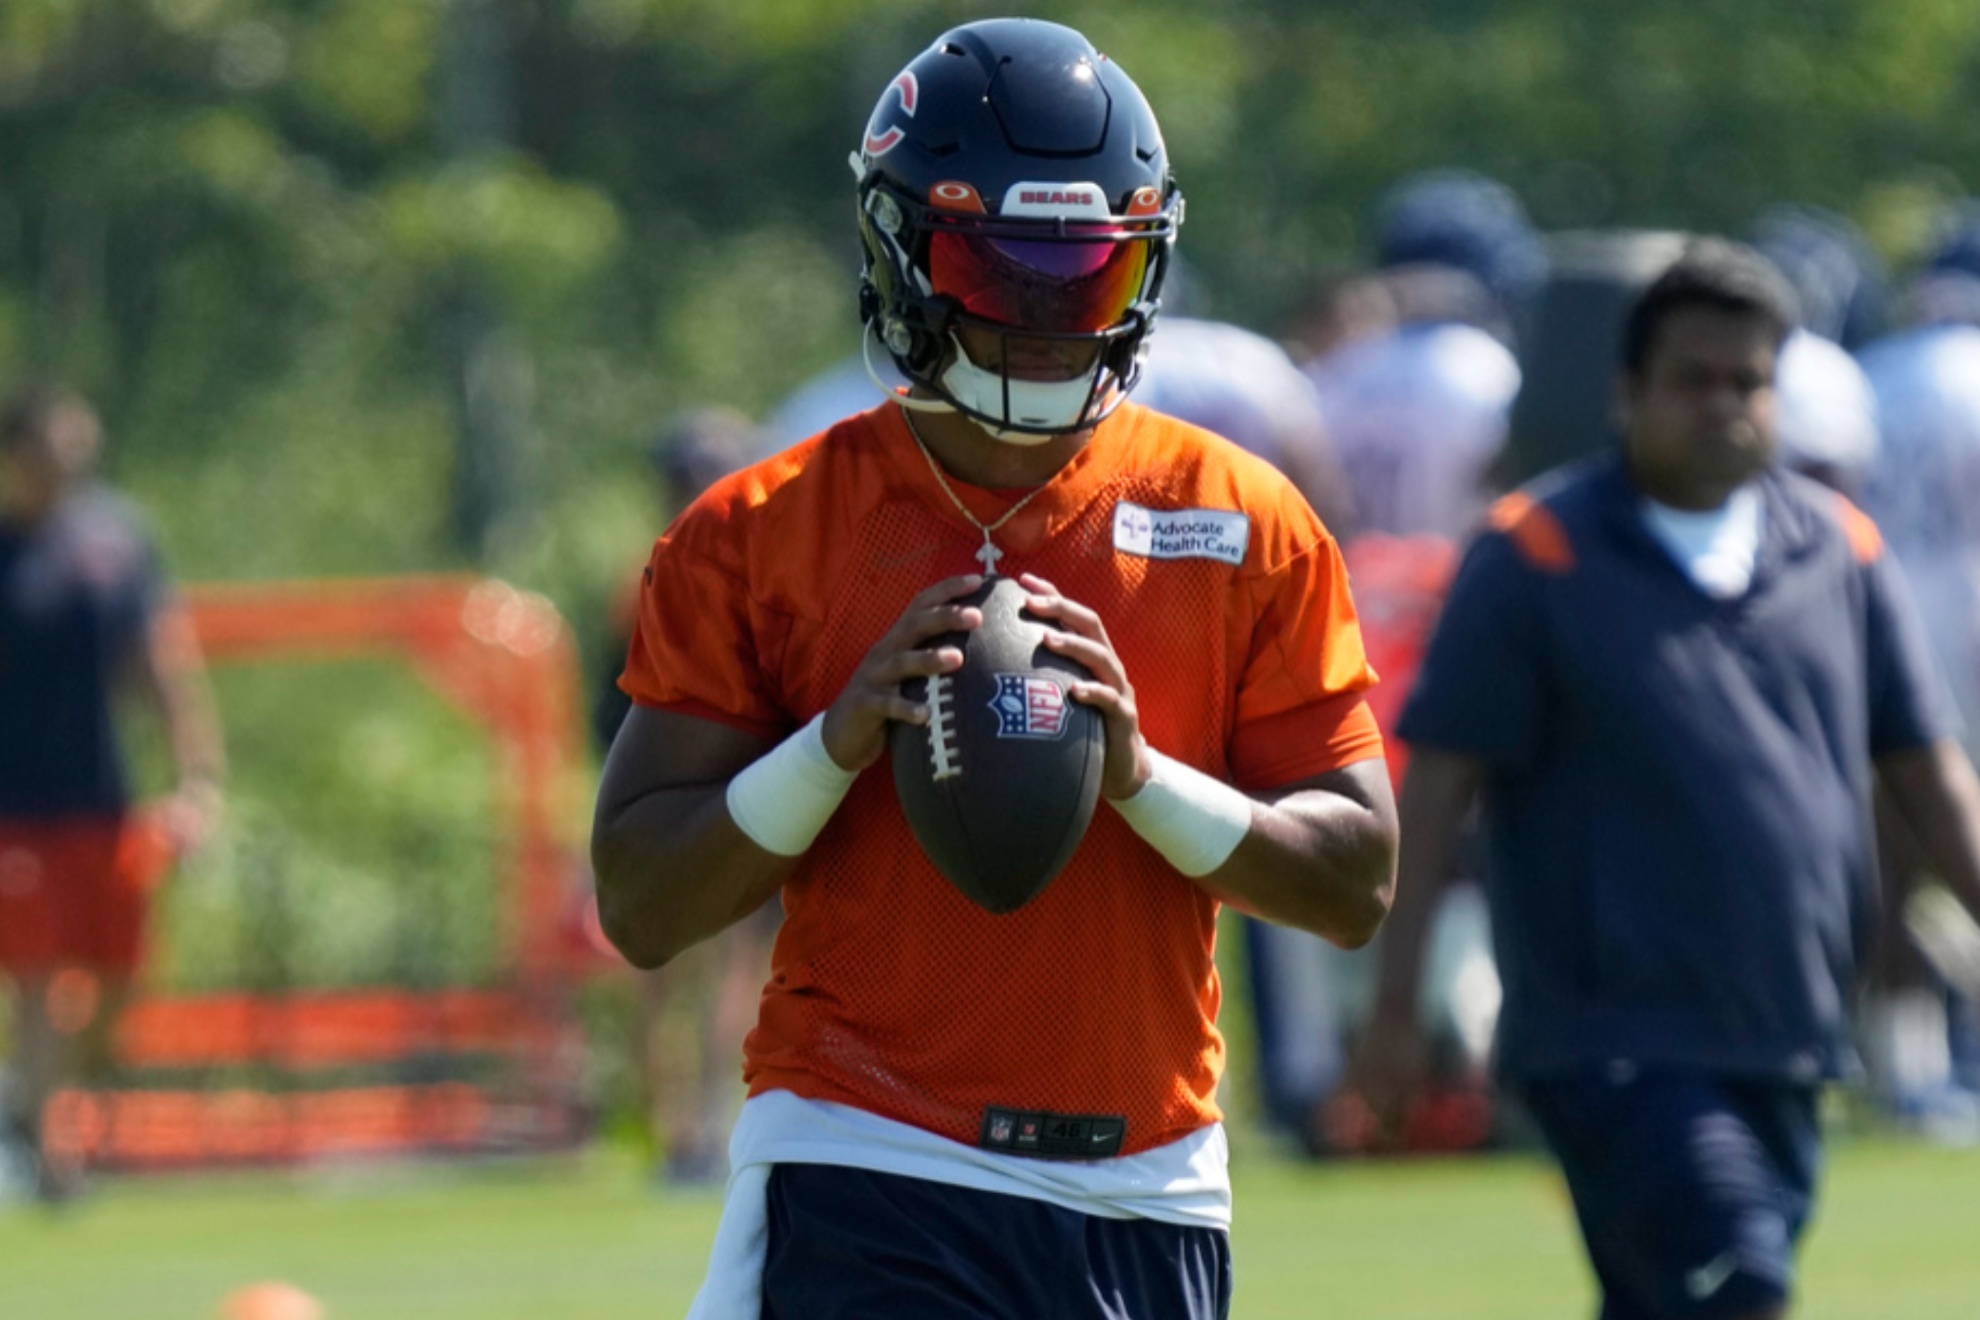 Quarterback Justin Fields will be the starter for the Bears first preseason game against the Tennessee Titans